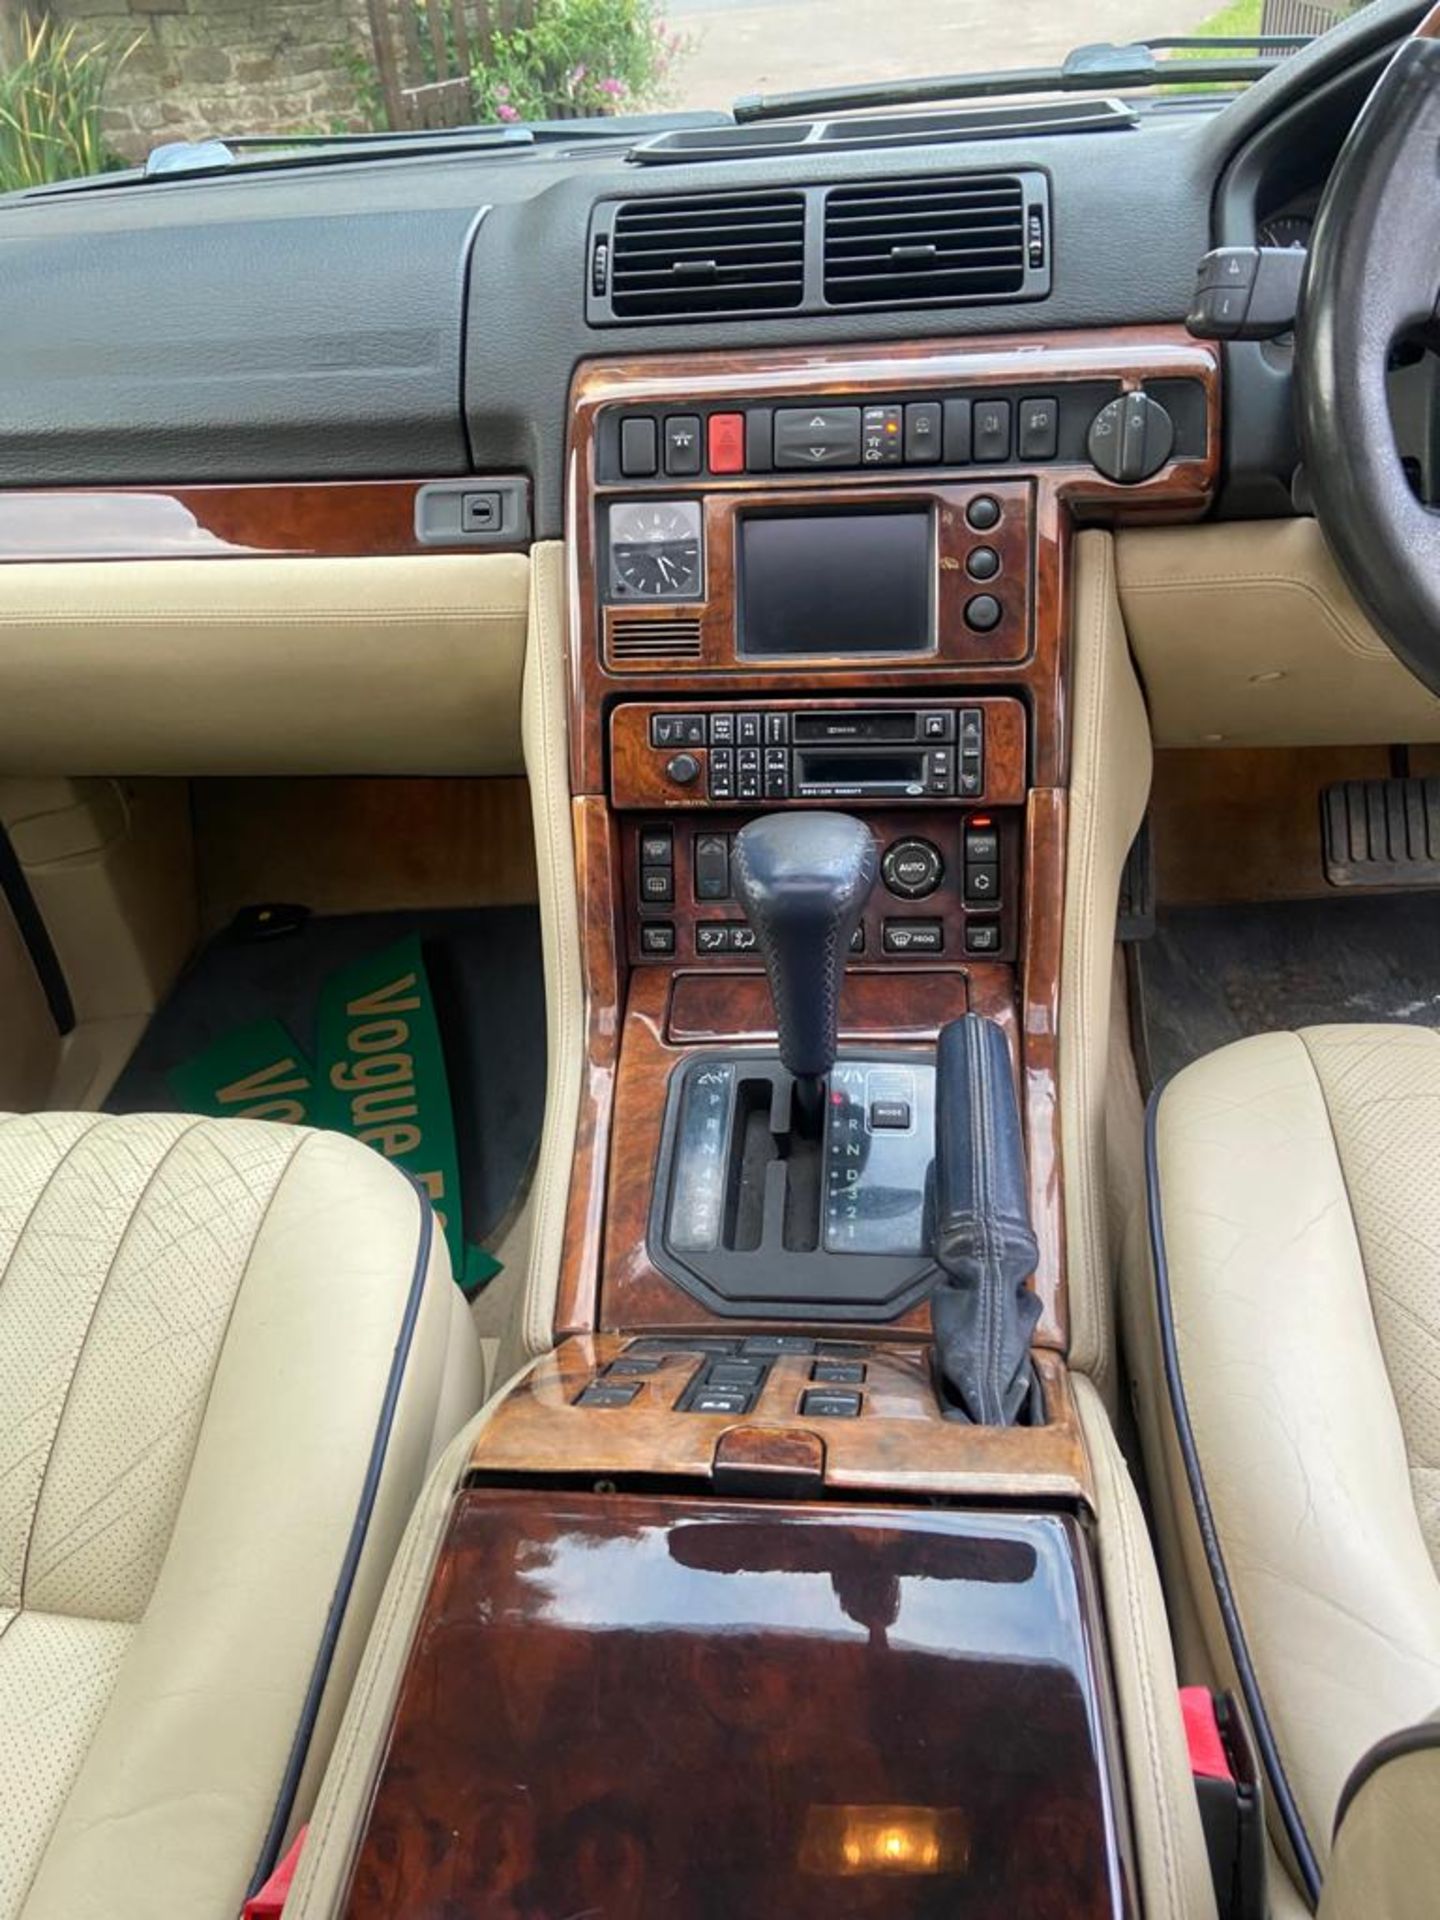 1998 Limited Edition Range Rover P38 - Image 10 of 39